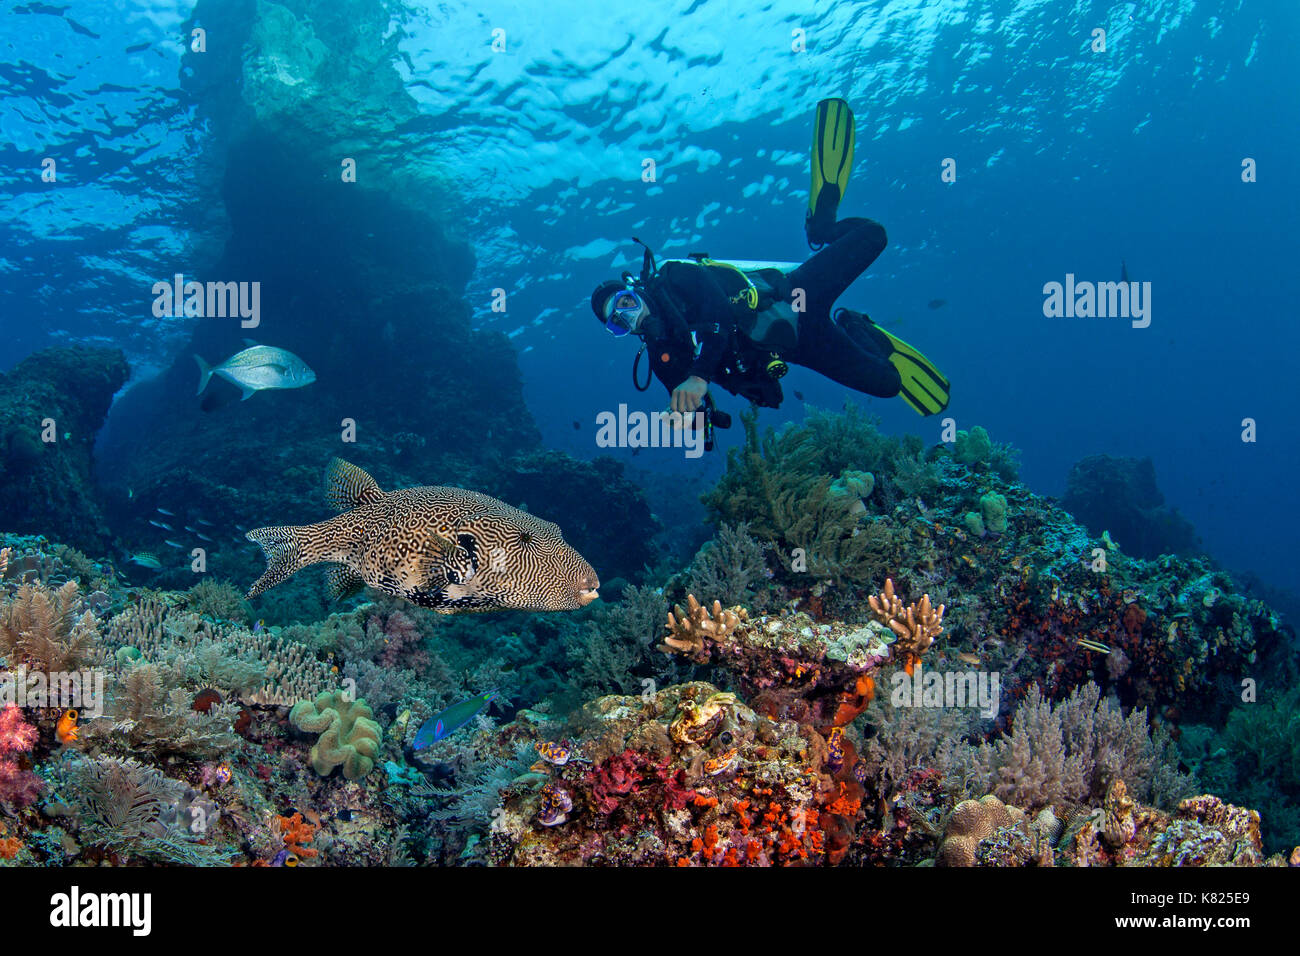 Scuba diver looks on as large map pufferfish (Arothron mappa) swims through coral reef. Raja Ampat, Indonesia. Stock Photo